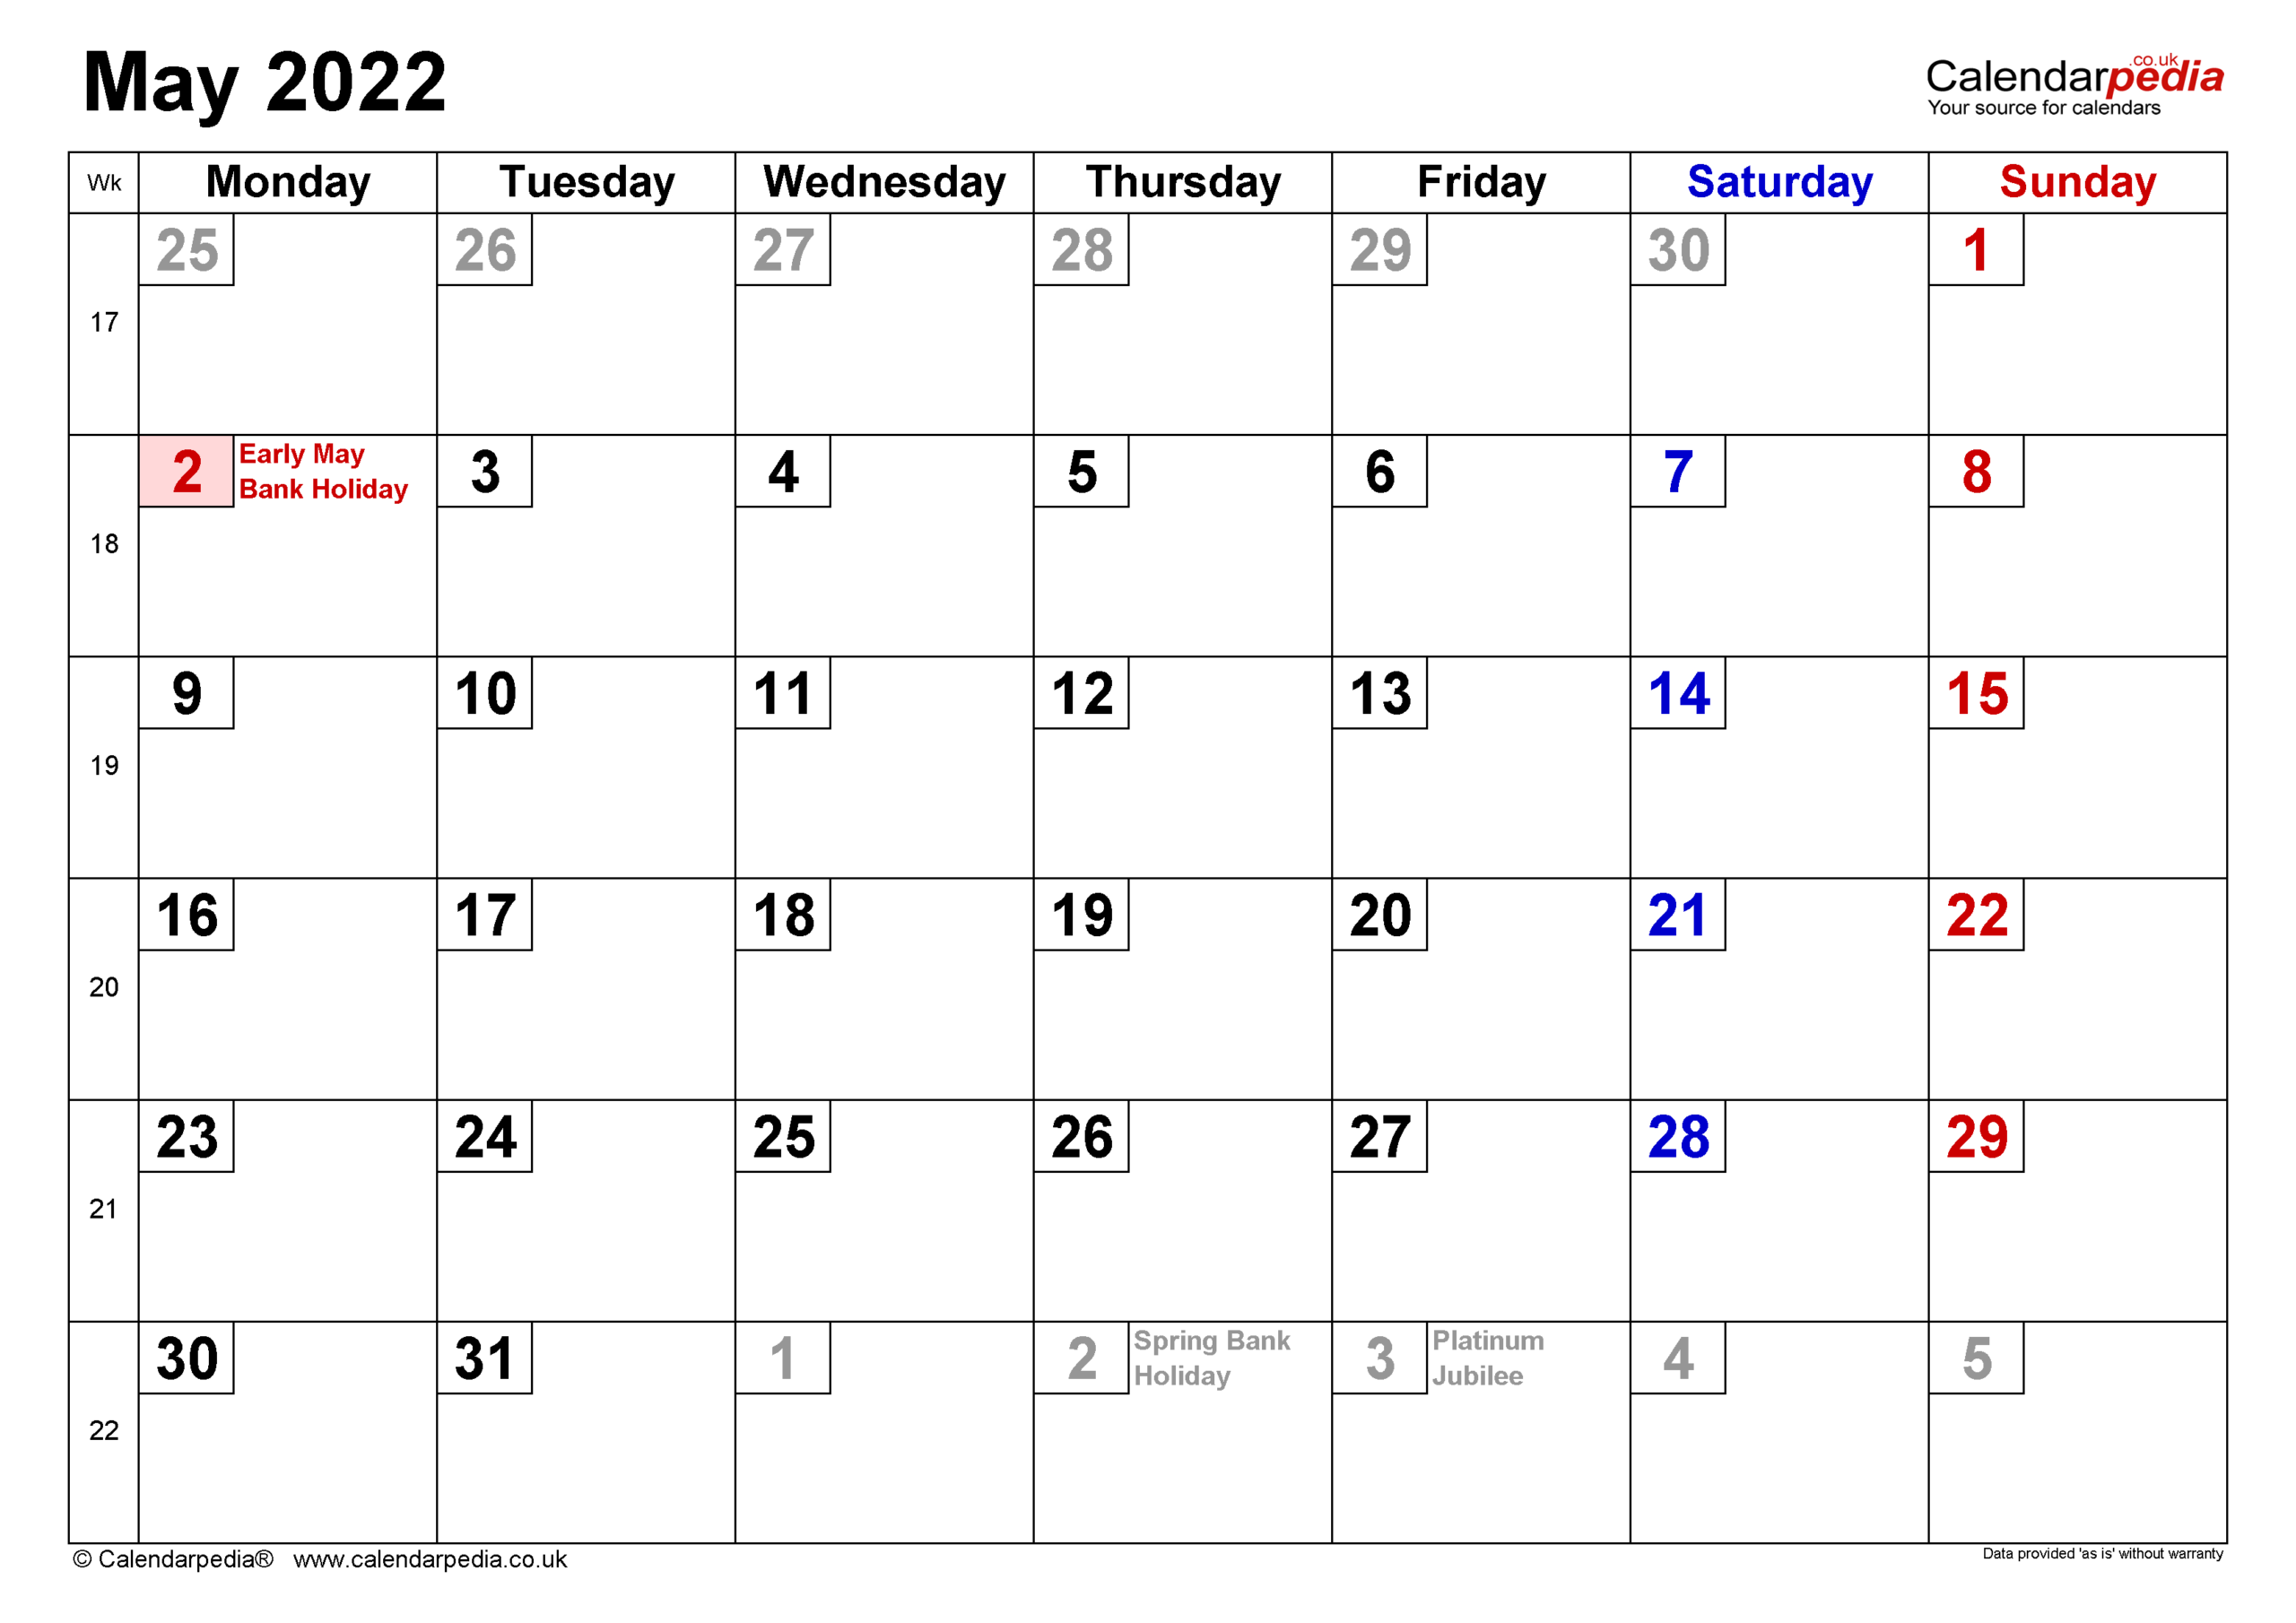 Calendar May 2022 Uk With Excel, Word And Pdf Templates-Calendar 2022 Uk With Bank Holidays